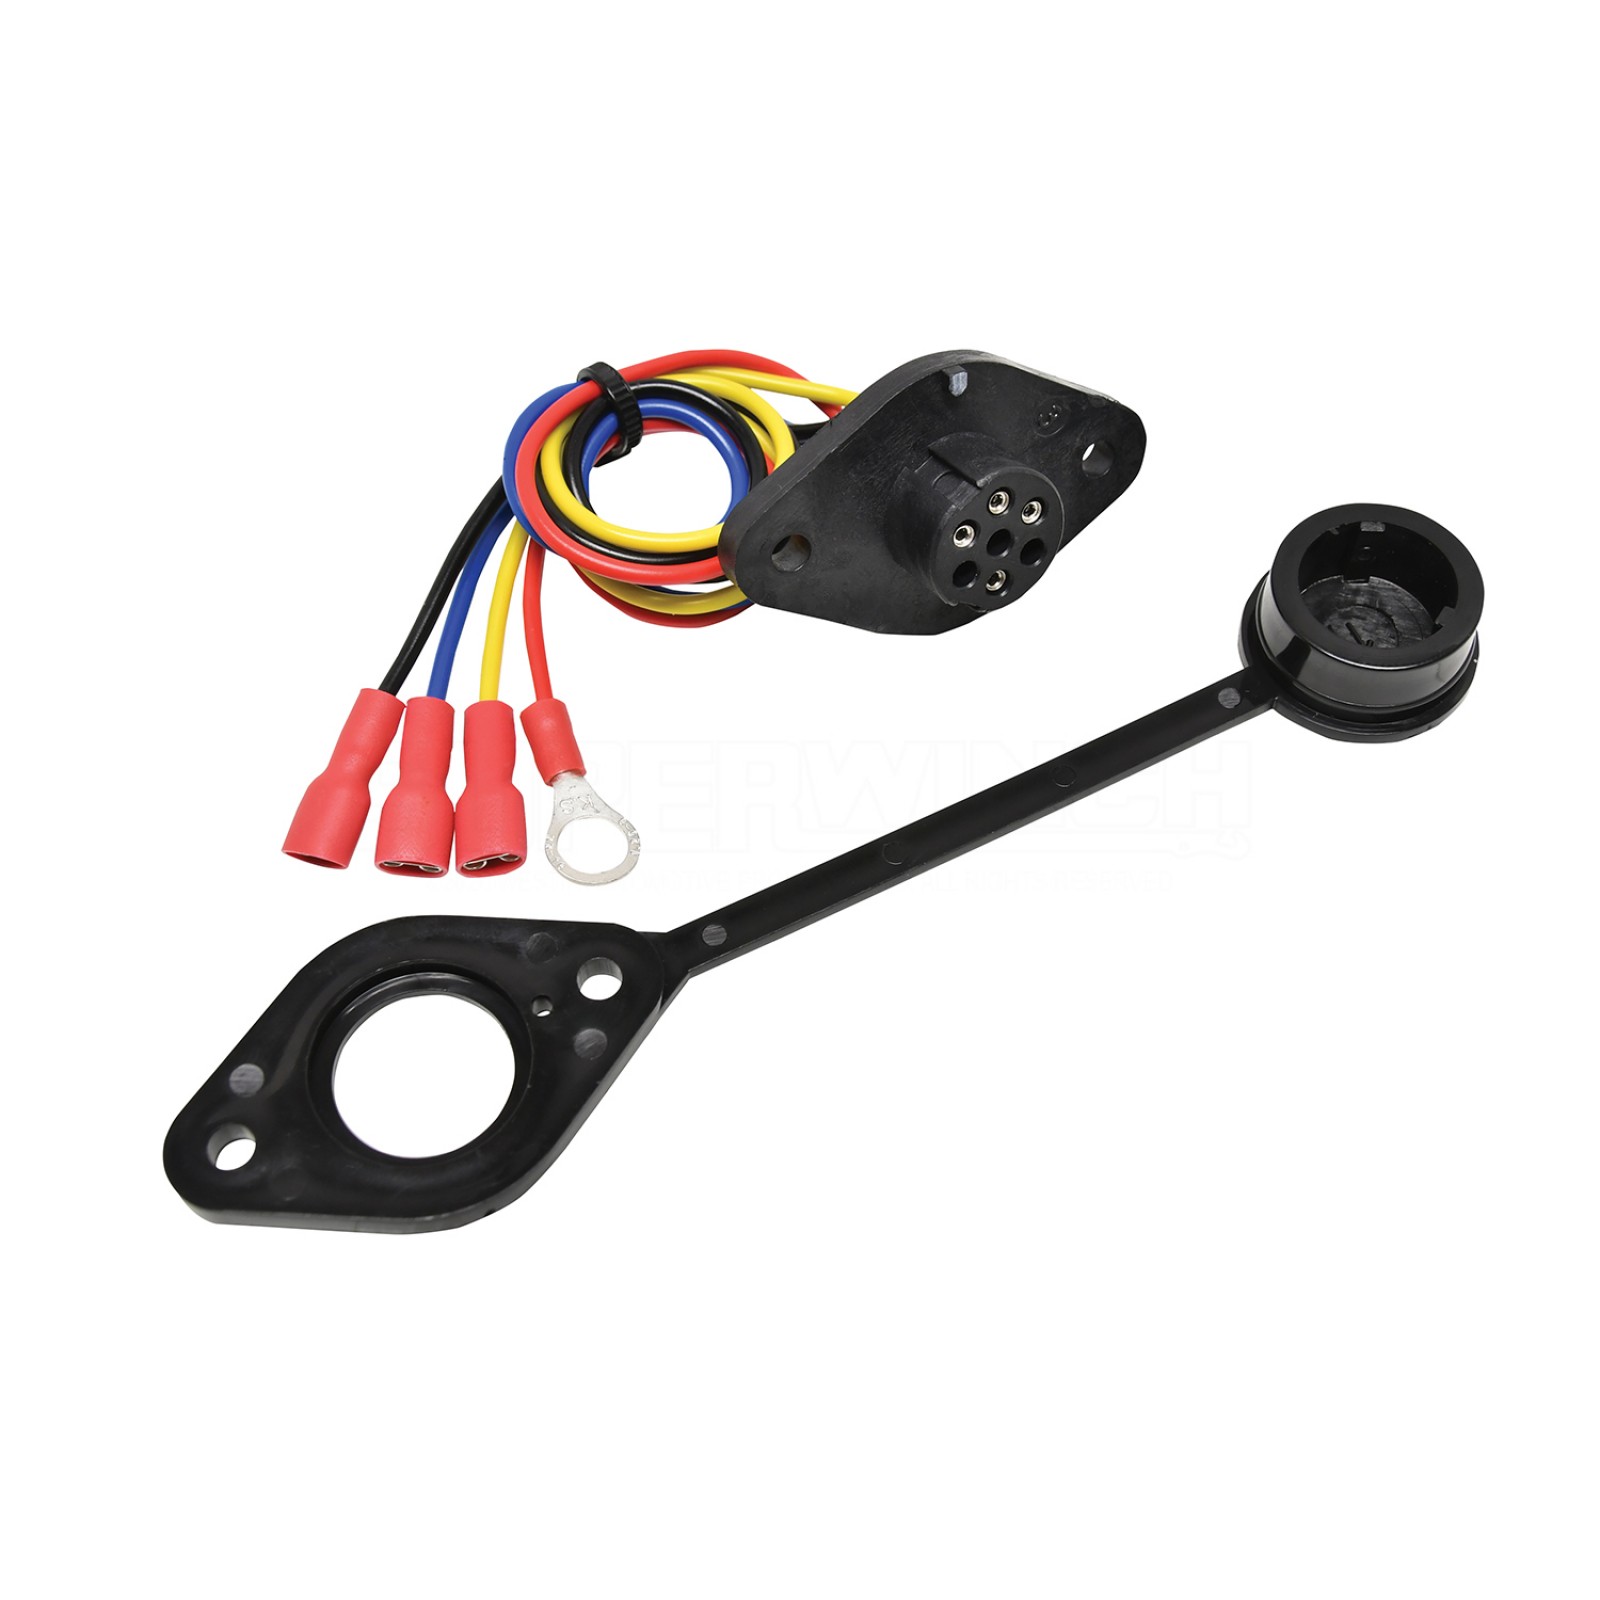 Winch Remote Control Socket Assembly